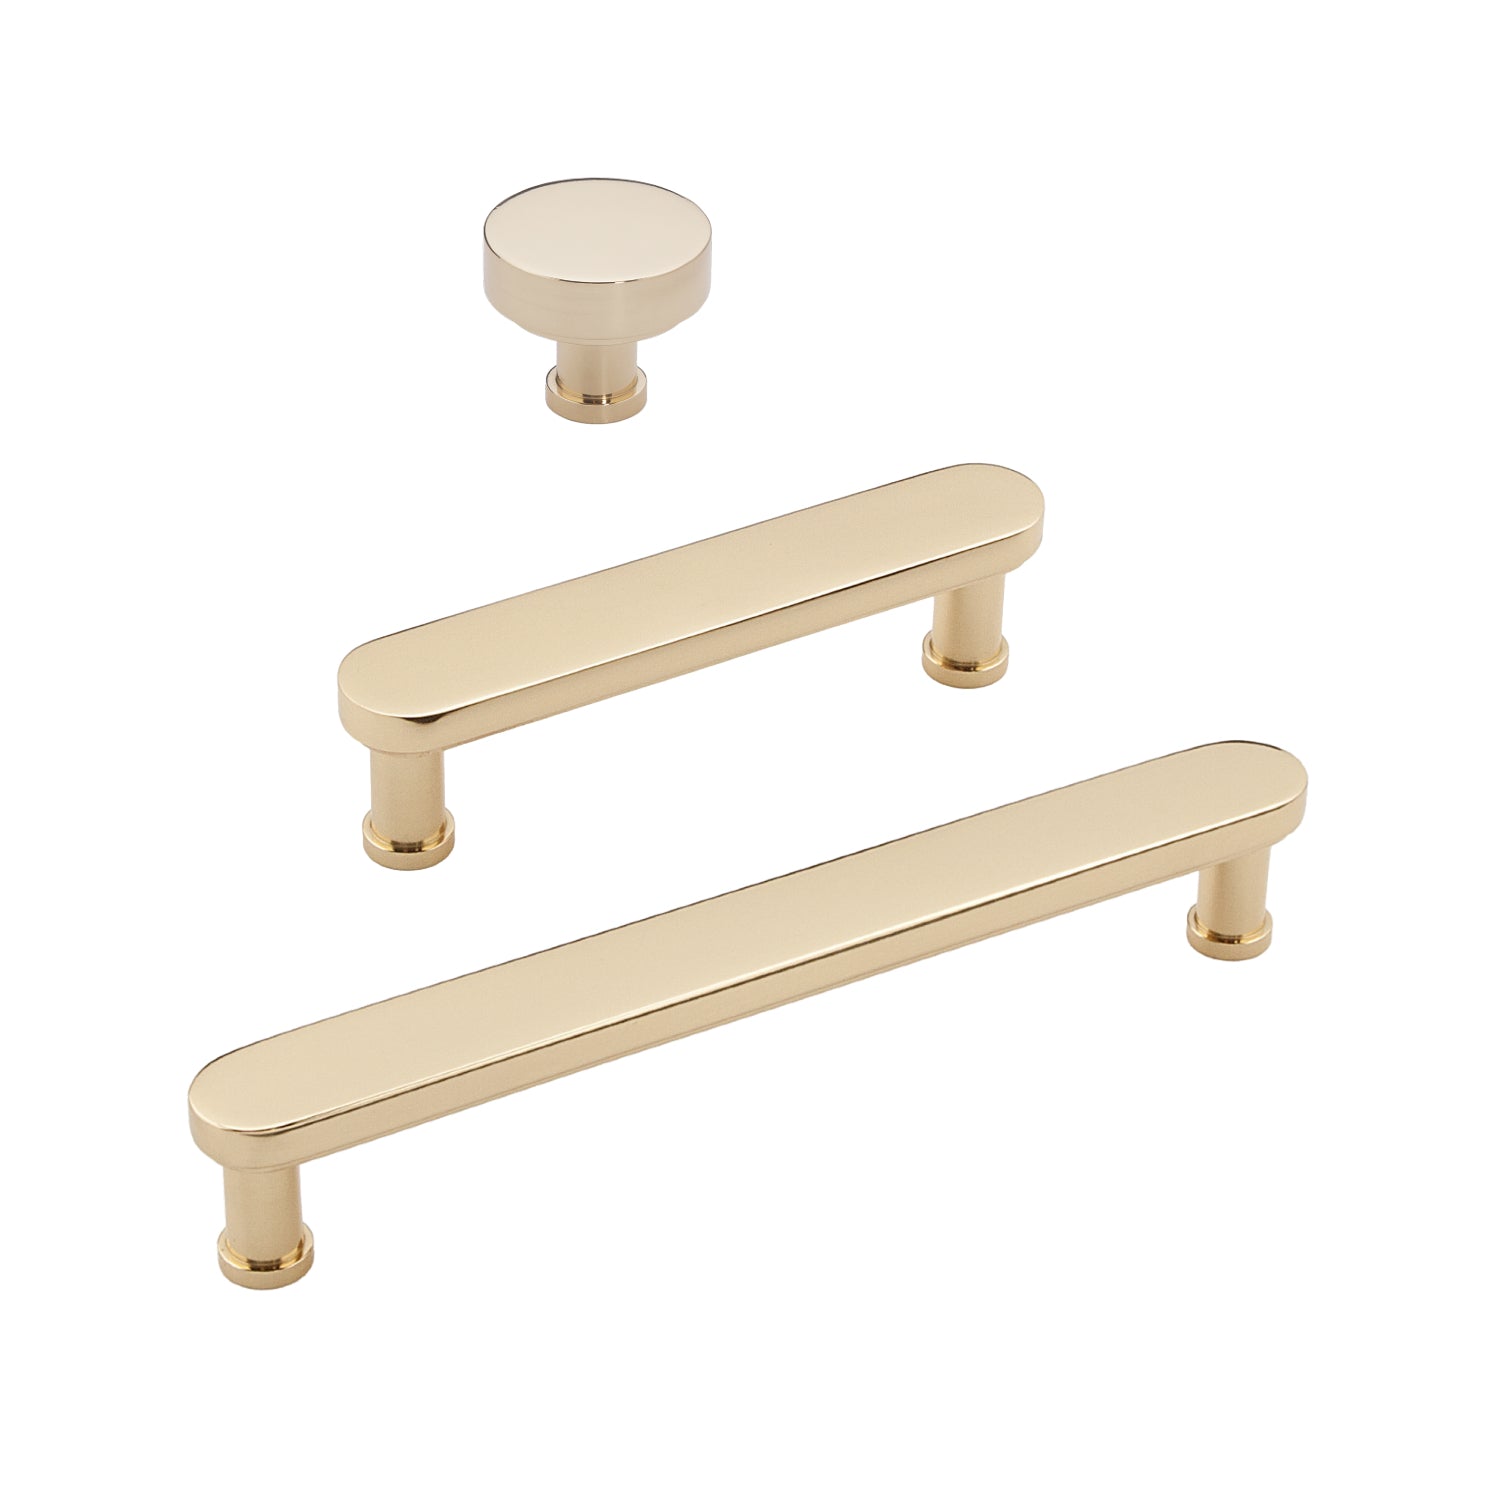 Unlacquered Brass Modern Cabinet Knob and Drawer Pulls - Industry Hardware